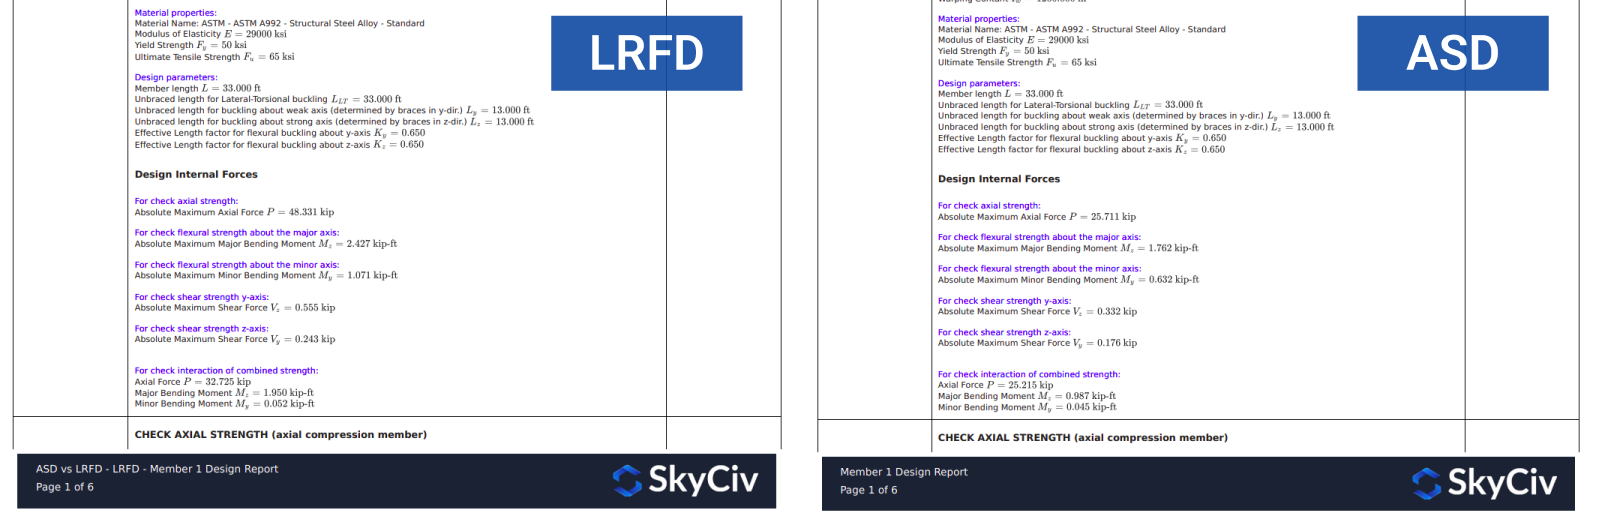 SkyCiv S3D showing detailed design reporting for ASD and LRFD